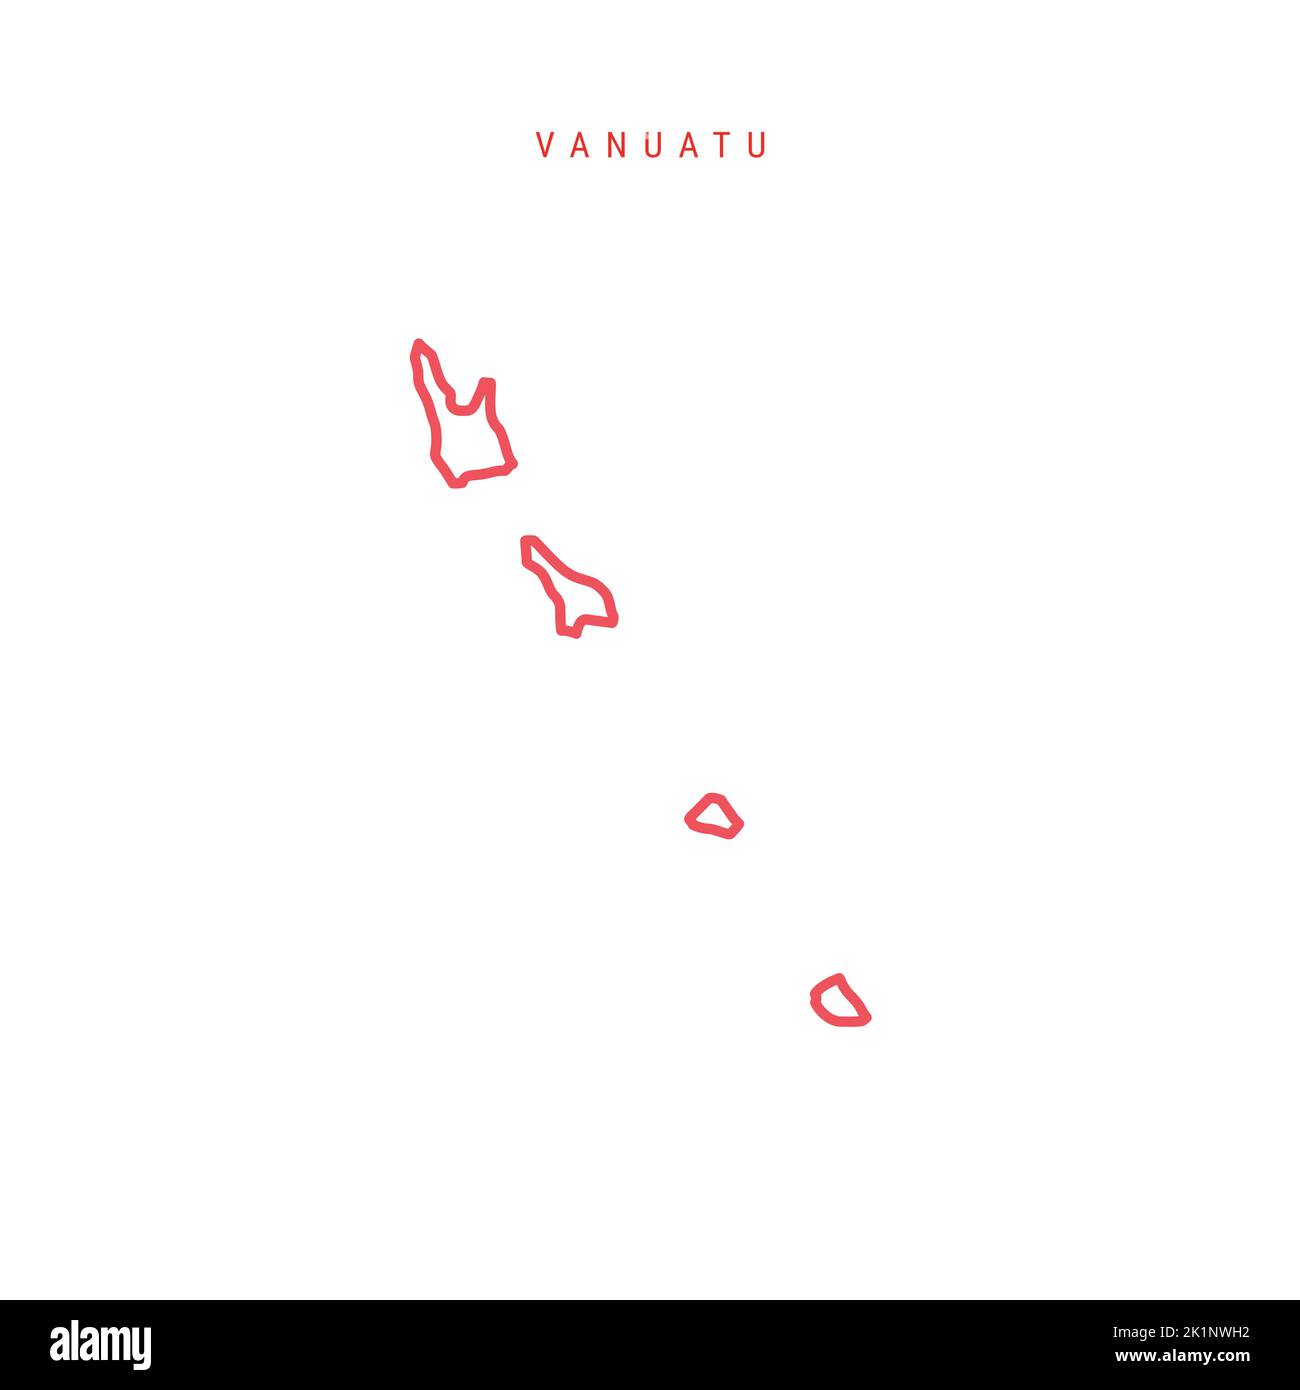 Vanuatu editable outline map. Vanuatuan red border. Country name. Adjust line weight. Change to any color. Vector illustration. Stock Vector